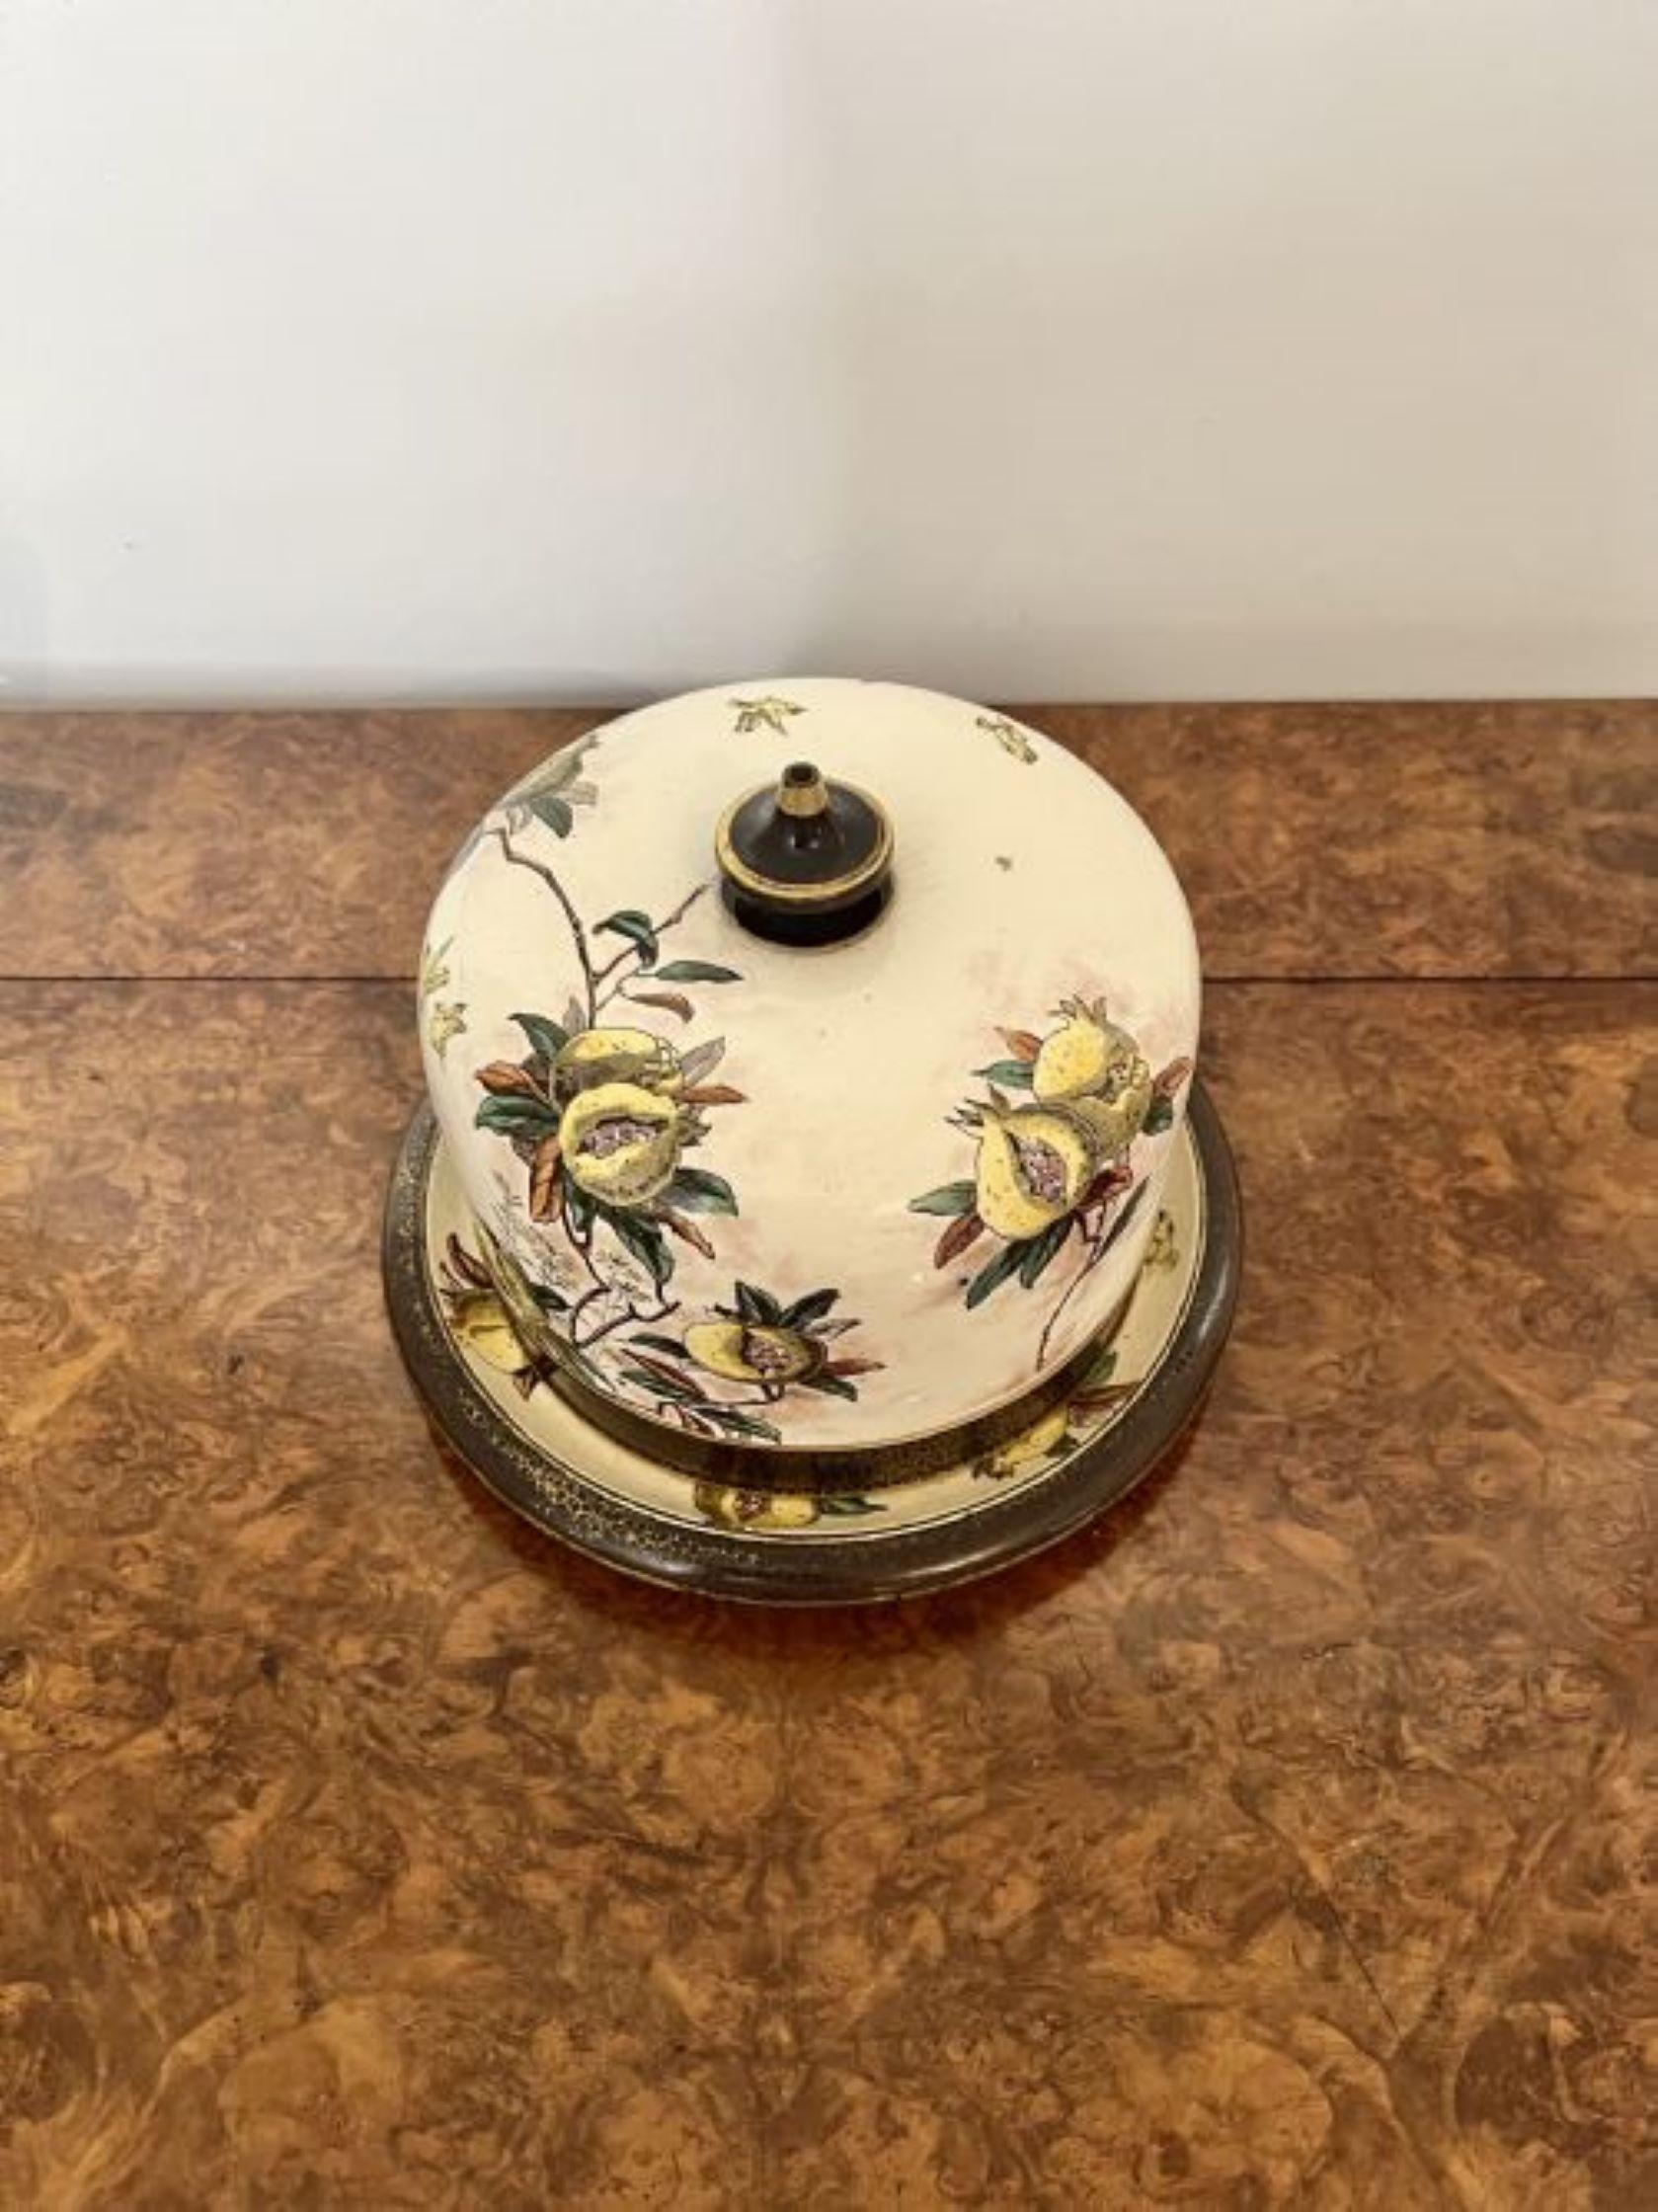 Quality antique Doulton Burslem cheese dish having a quality Doulton Burslem cheese dish and cover with hand painted flowers and birds in wonderful yellow, green, orange, blue and gold colours.